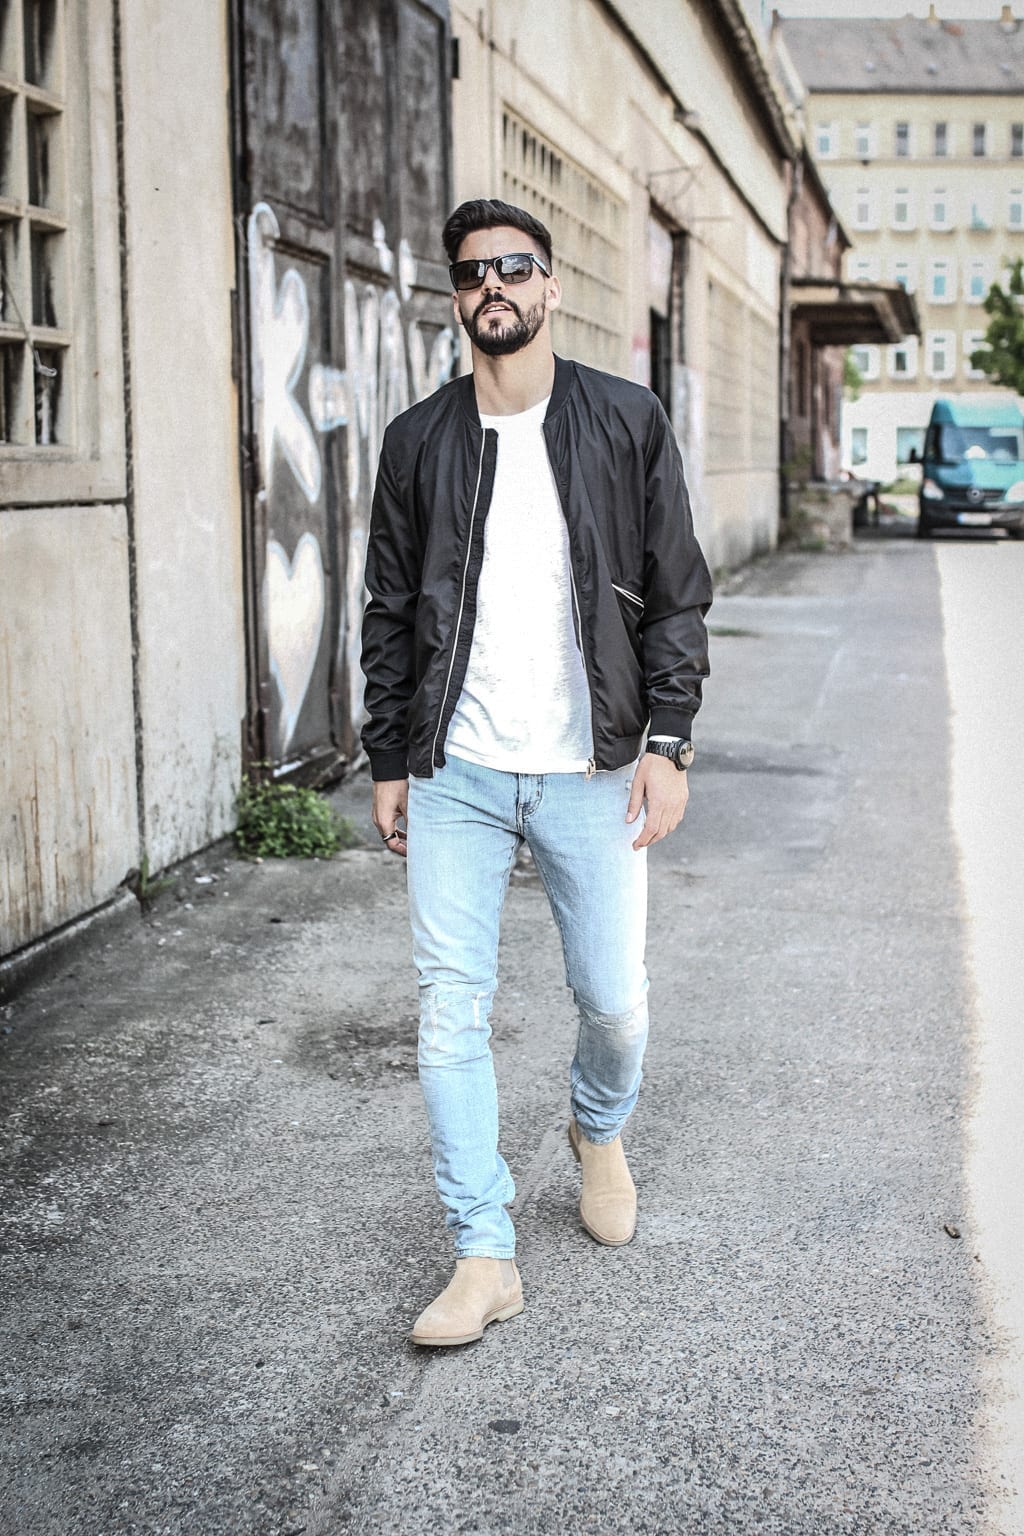 CK1603_Constantly-K-anthony-tony-jung-fußball-spieler-private-fashion-street-style-7057-2